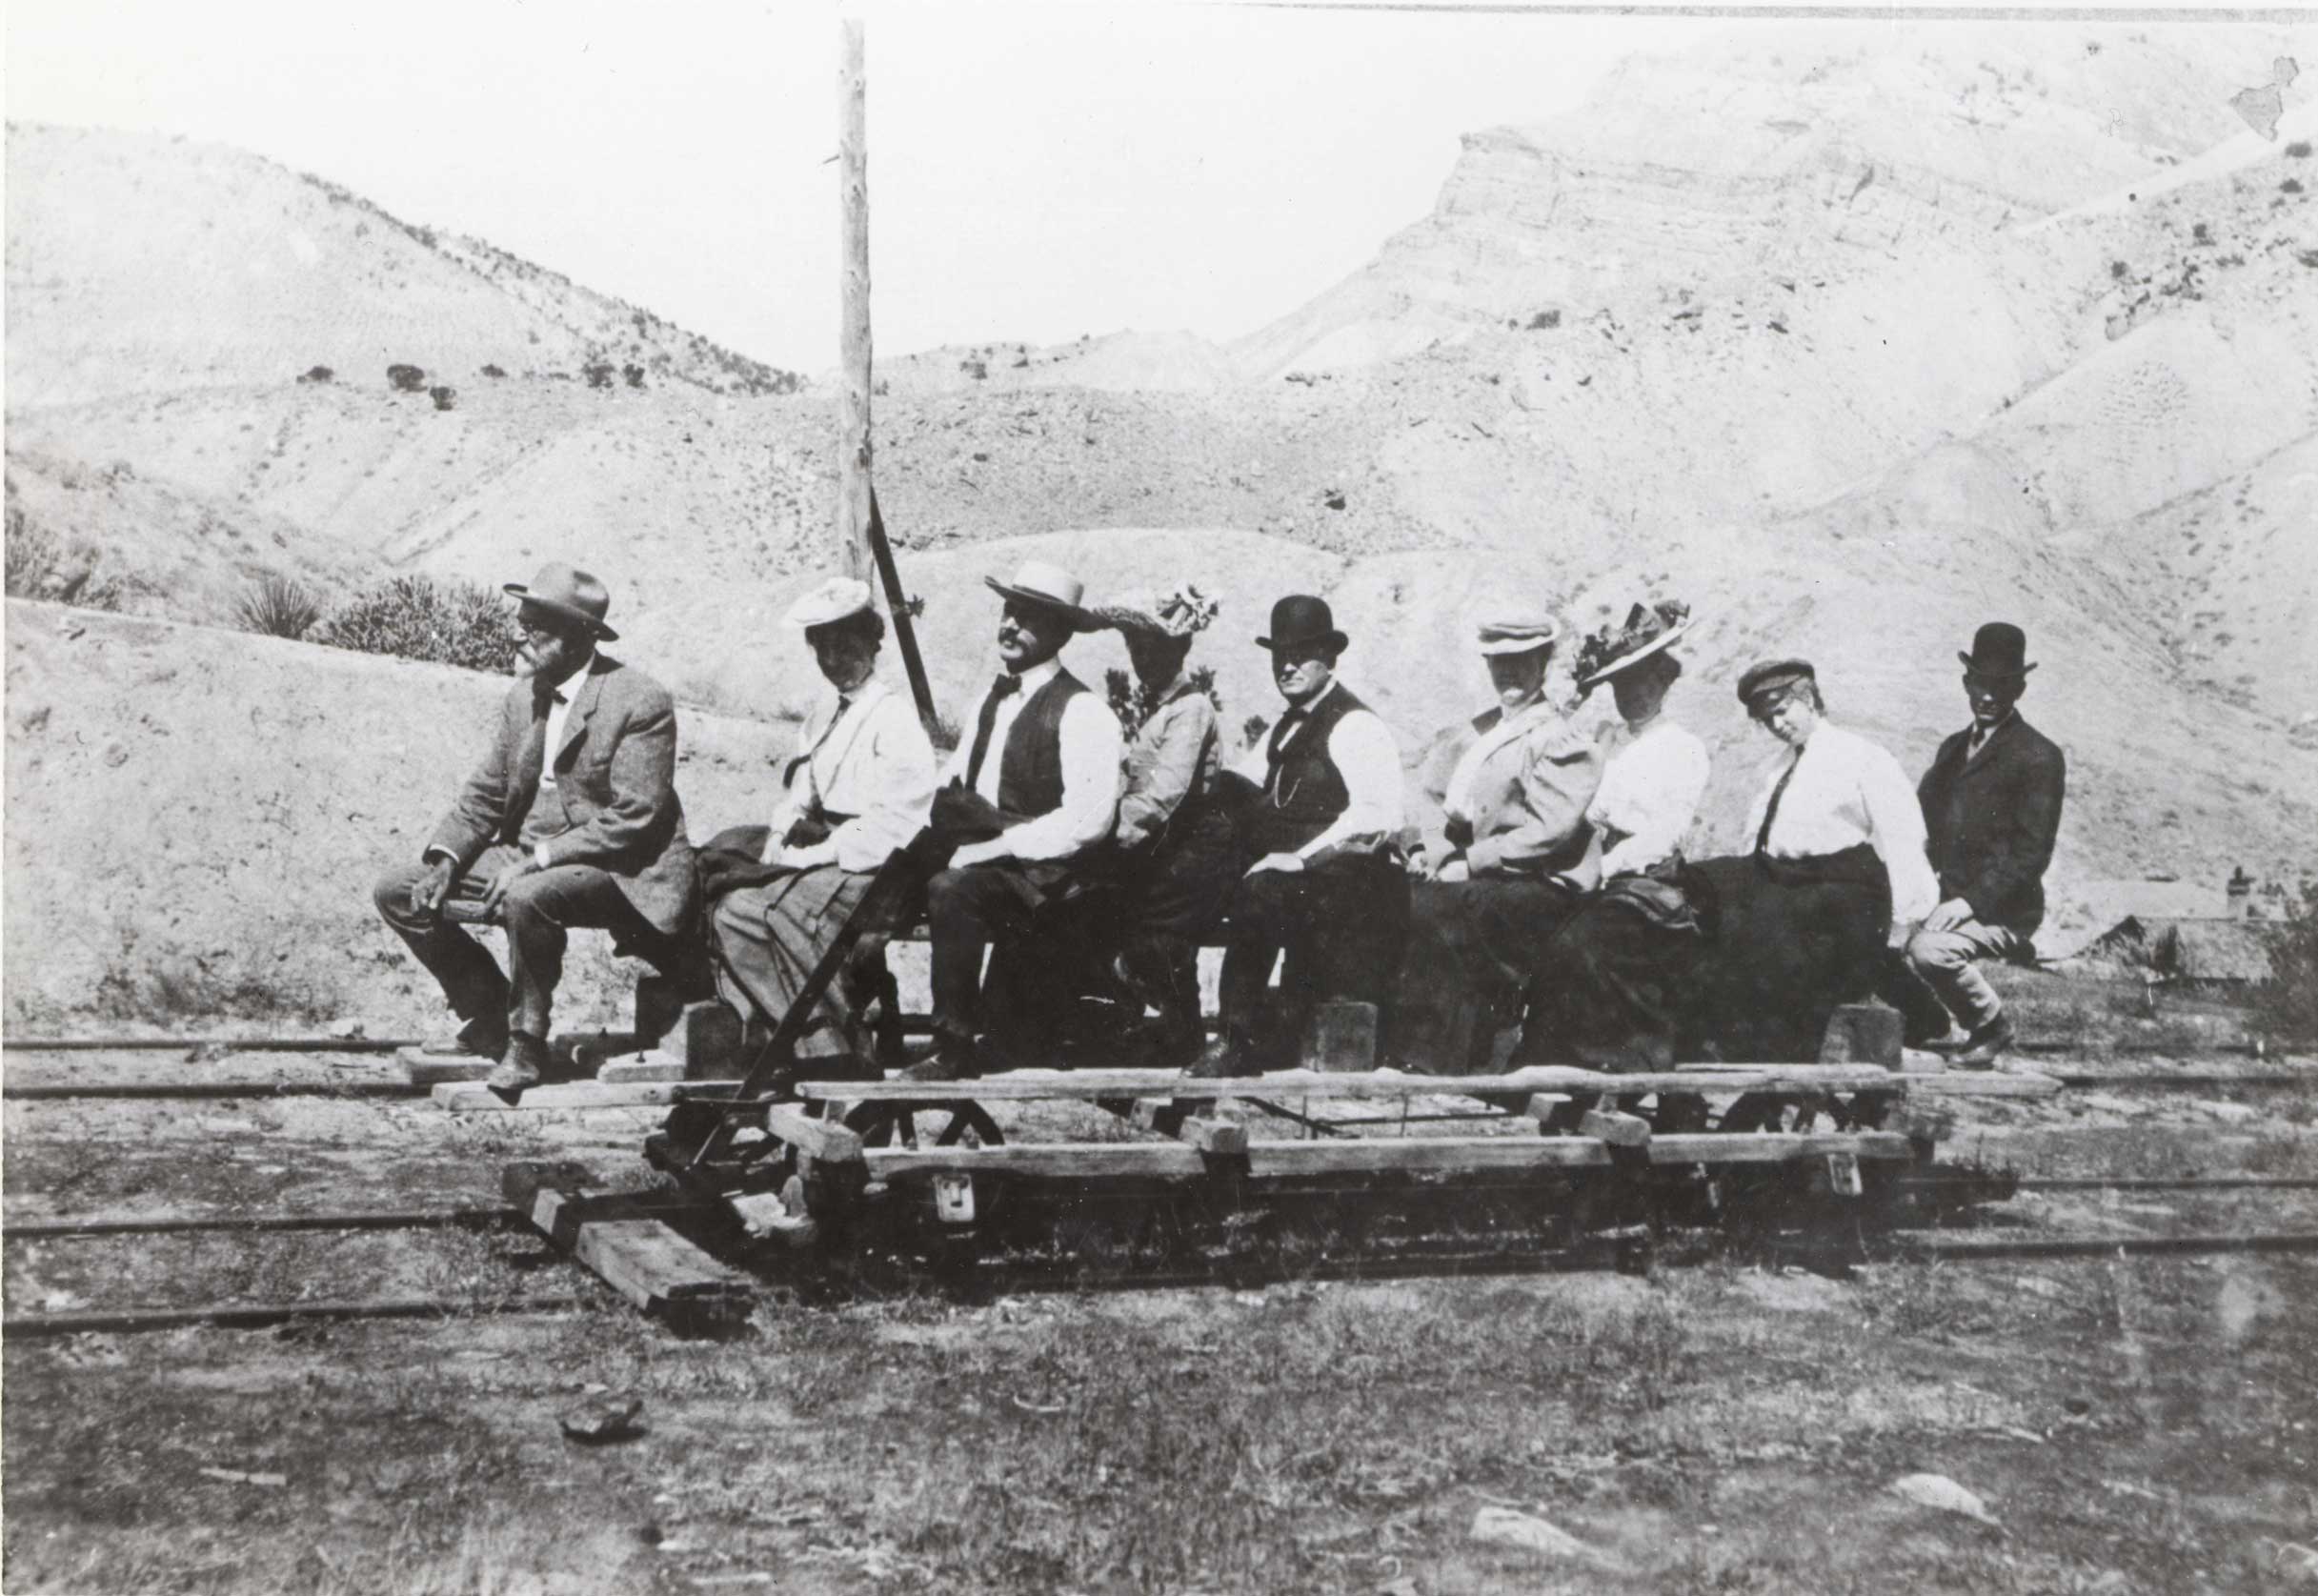 The Go Devil on the Little Book Cliff Railroad in 1903.  Photo # 1982.0000.0020, Lloyd Files Research Library.